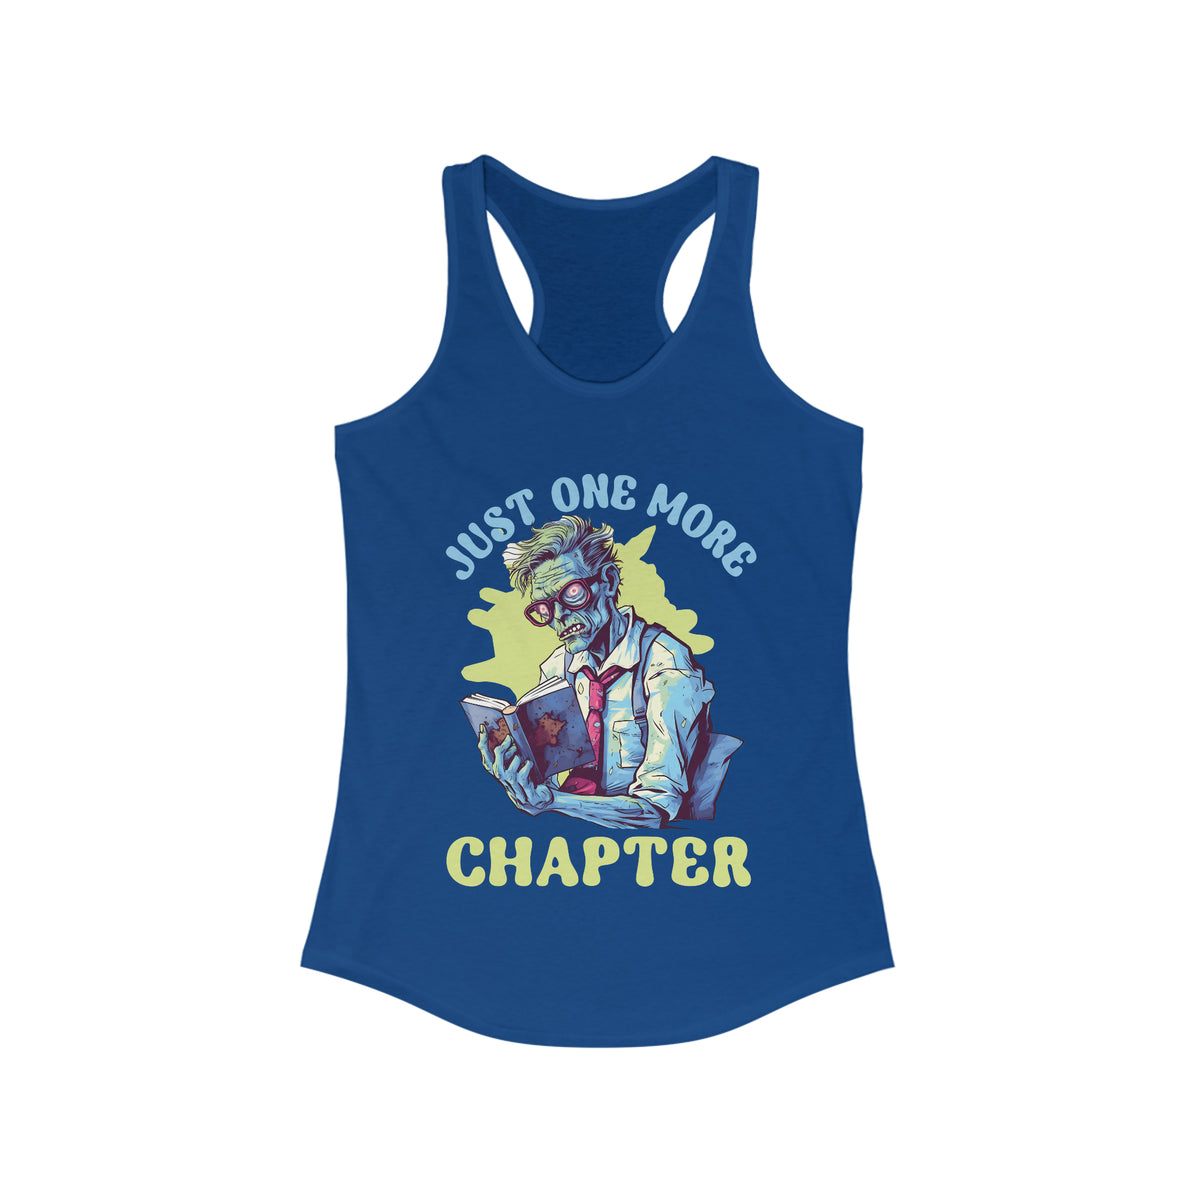 Just One More Chapter Zombie Shirt | Halloween Book Shirt | Book Lover shirt | Book Lover Gift | Women's Slim-fit Racerback Tank Top